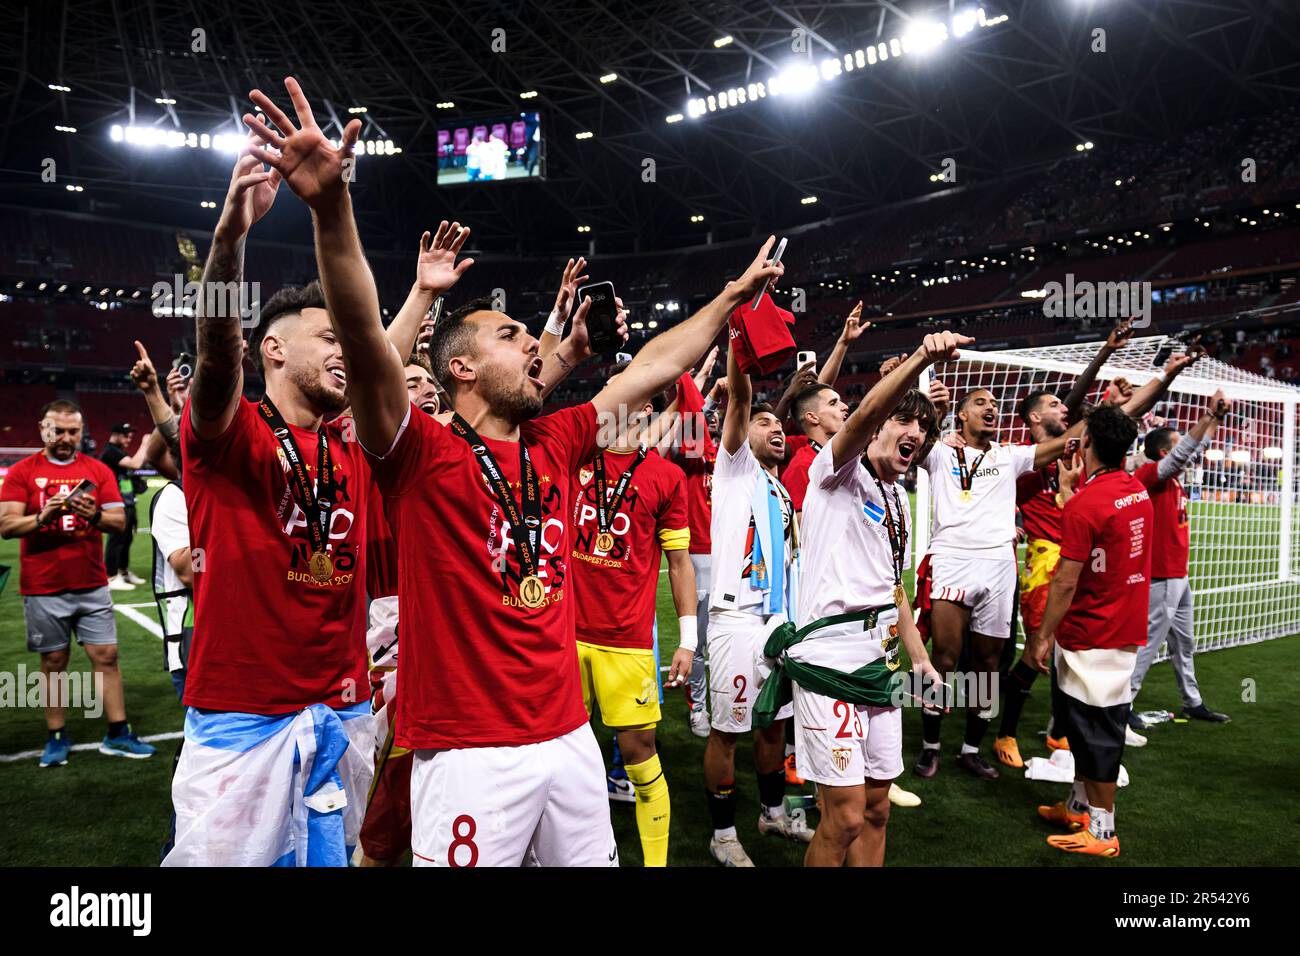 Budapest, Hungary. 1 June 2023. Players of Sevilla FC celebrate with the trophy during the UEFA Europa League final football match between Sevilla FC and AS Roma. Credit: Nicolò Campo/Alamy Live News Stock Photo